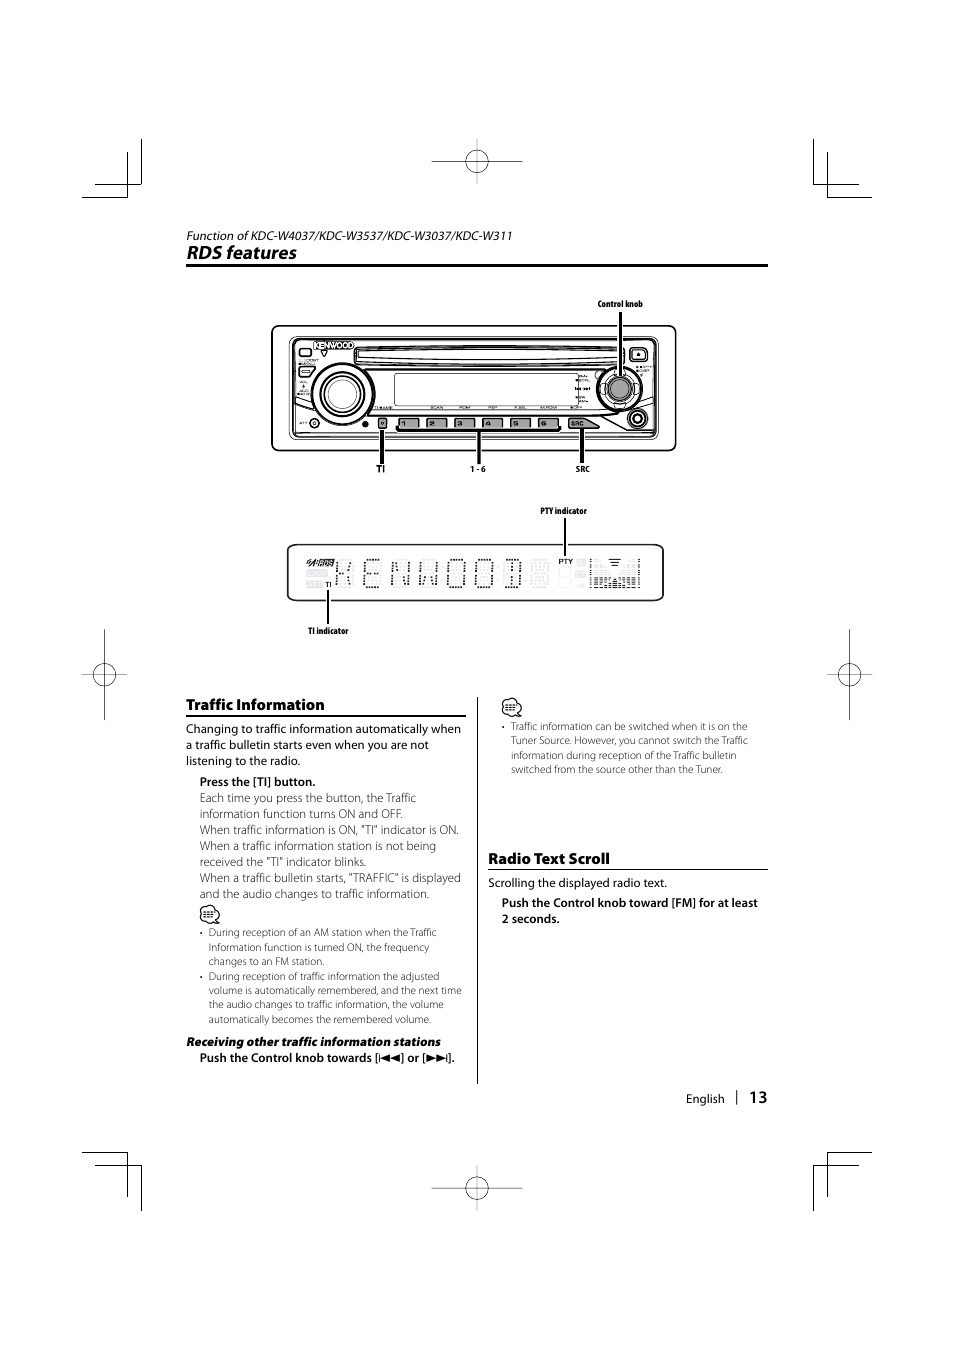 Rds features | Kenwood KDC-W311 User Manual | Page 13 / 36 | Original mode